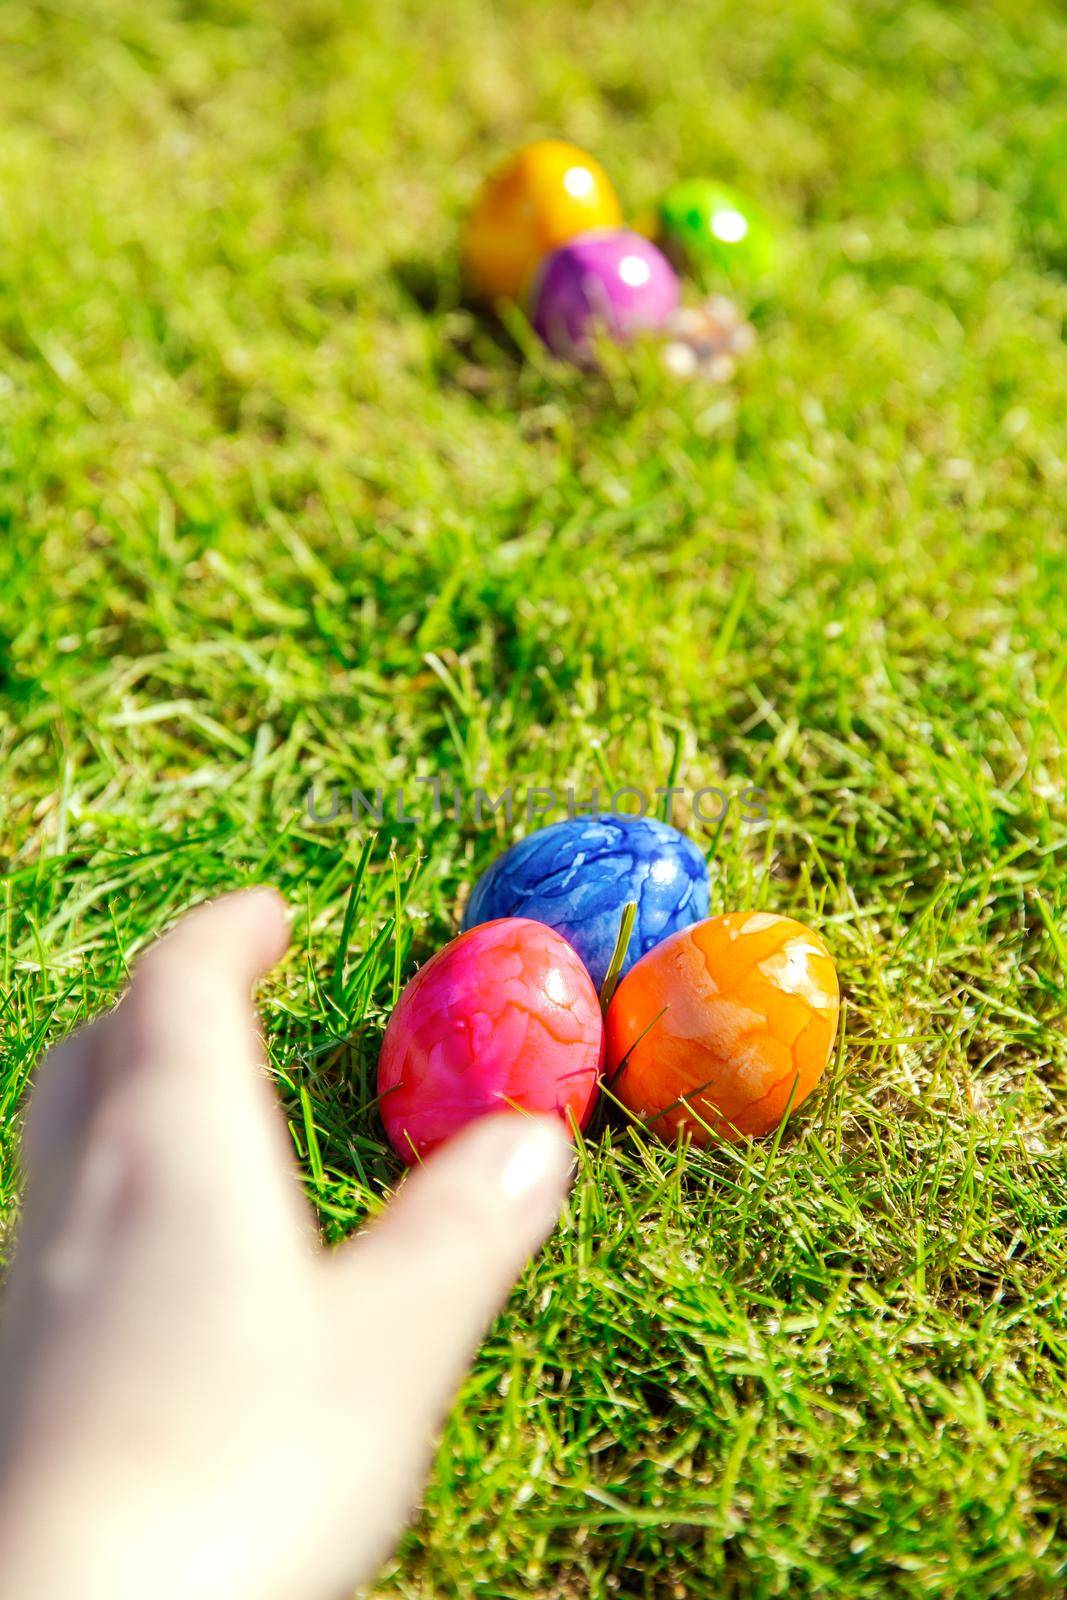 Easter eggs hidden in the grass, Colorful handmade painted Easter eggs hunt, Happy Easter Holiday concept in garden or park,spring